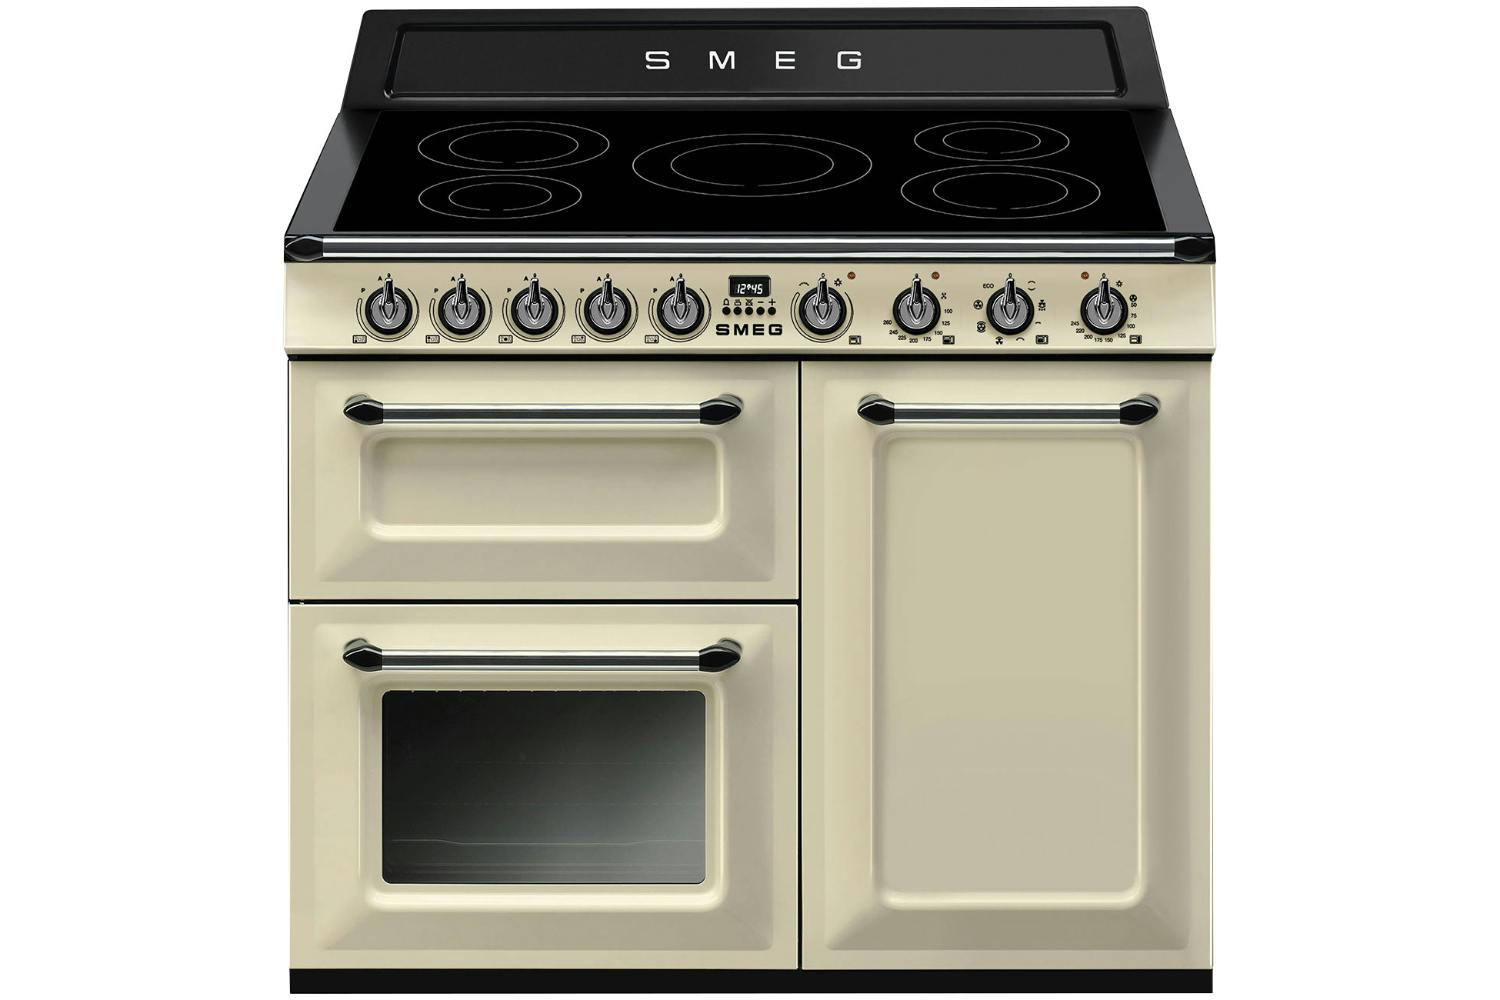 Smeg 100cm Victoria Electric Cooker with Induction Hob | TR103IP2 | Cream